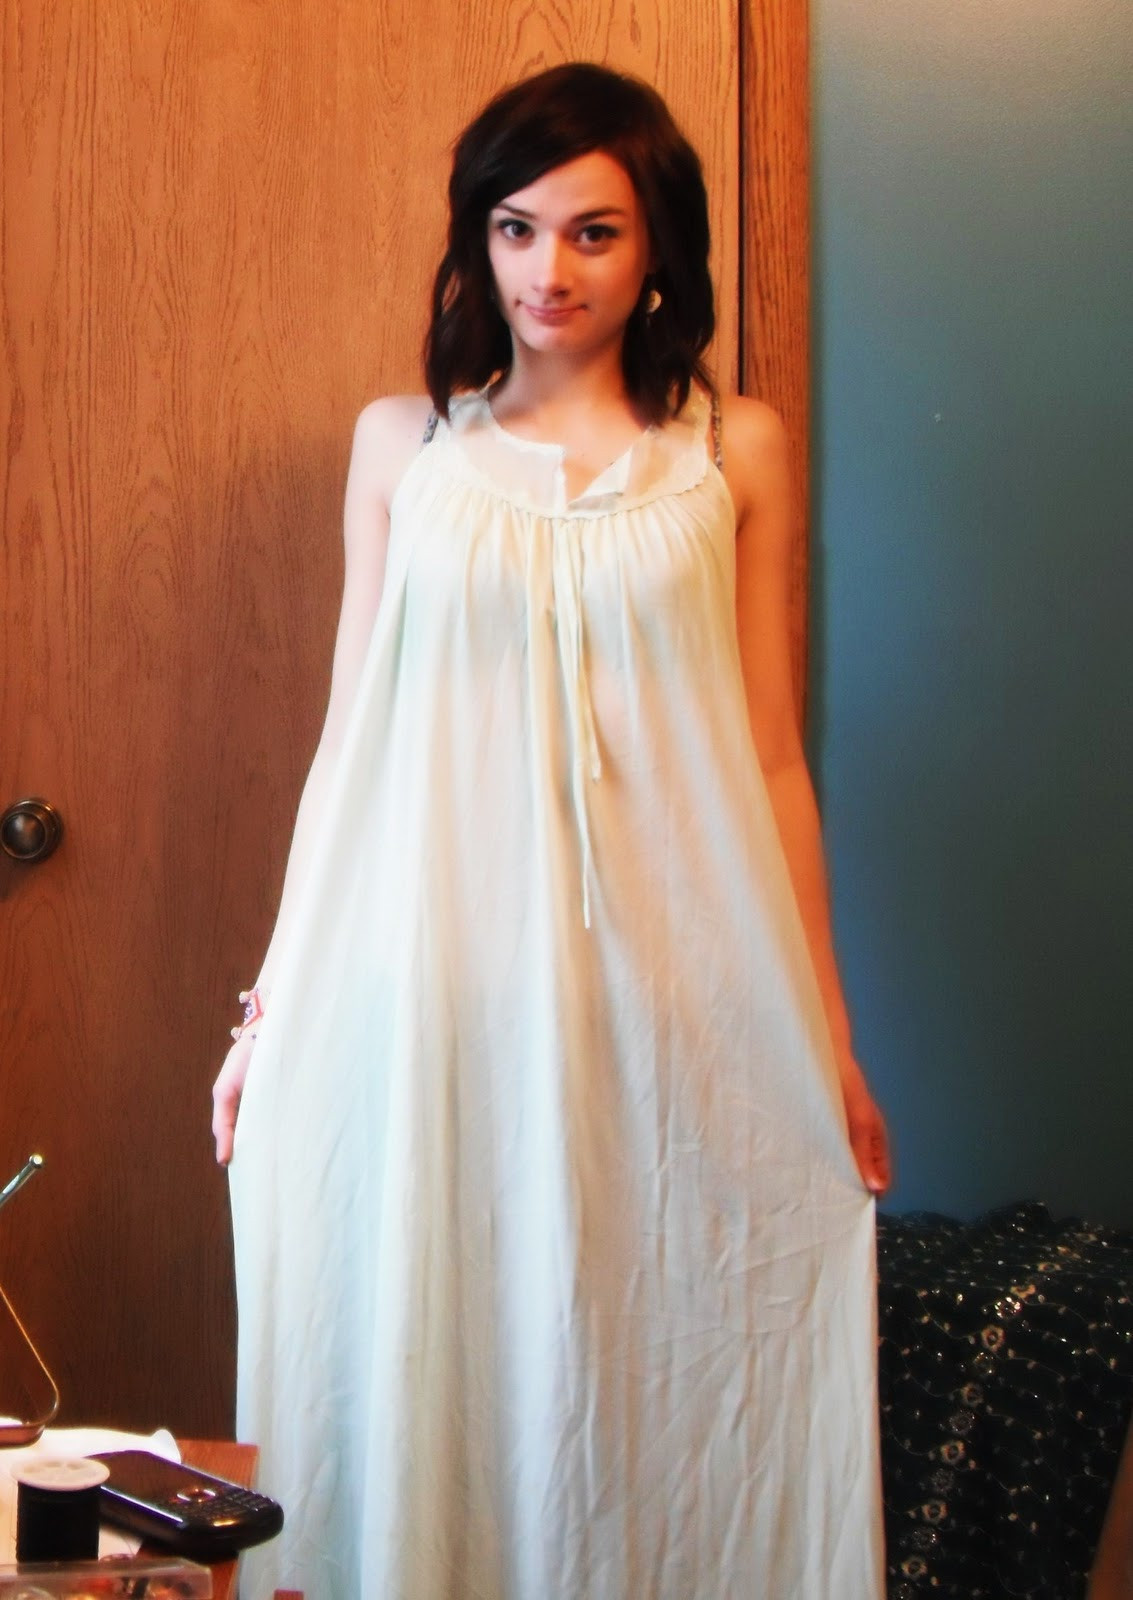 DIY Babydoll Nightie
 Downstairs Mixup DIY What to Do with a Rogue Nightgown